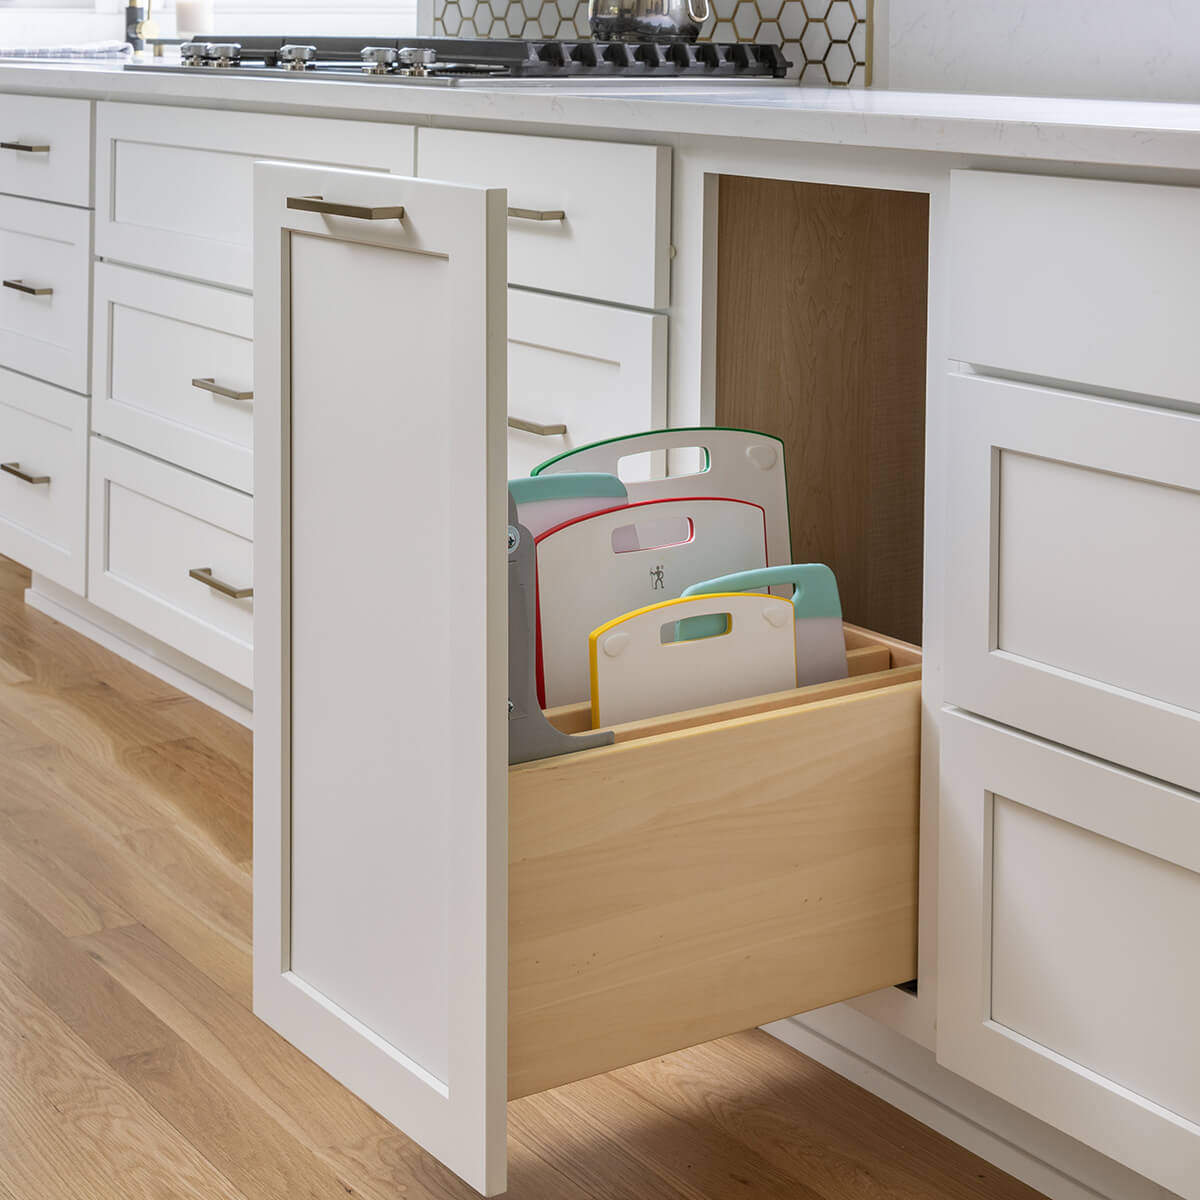 Pull-out tray storage base cabinet by Dura Supreme Cabinetry.